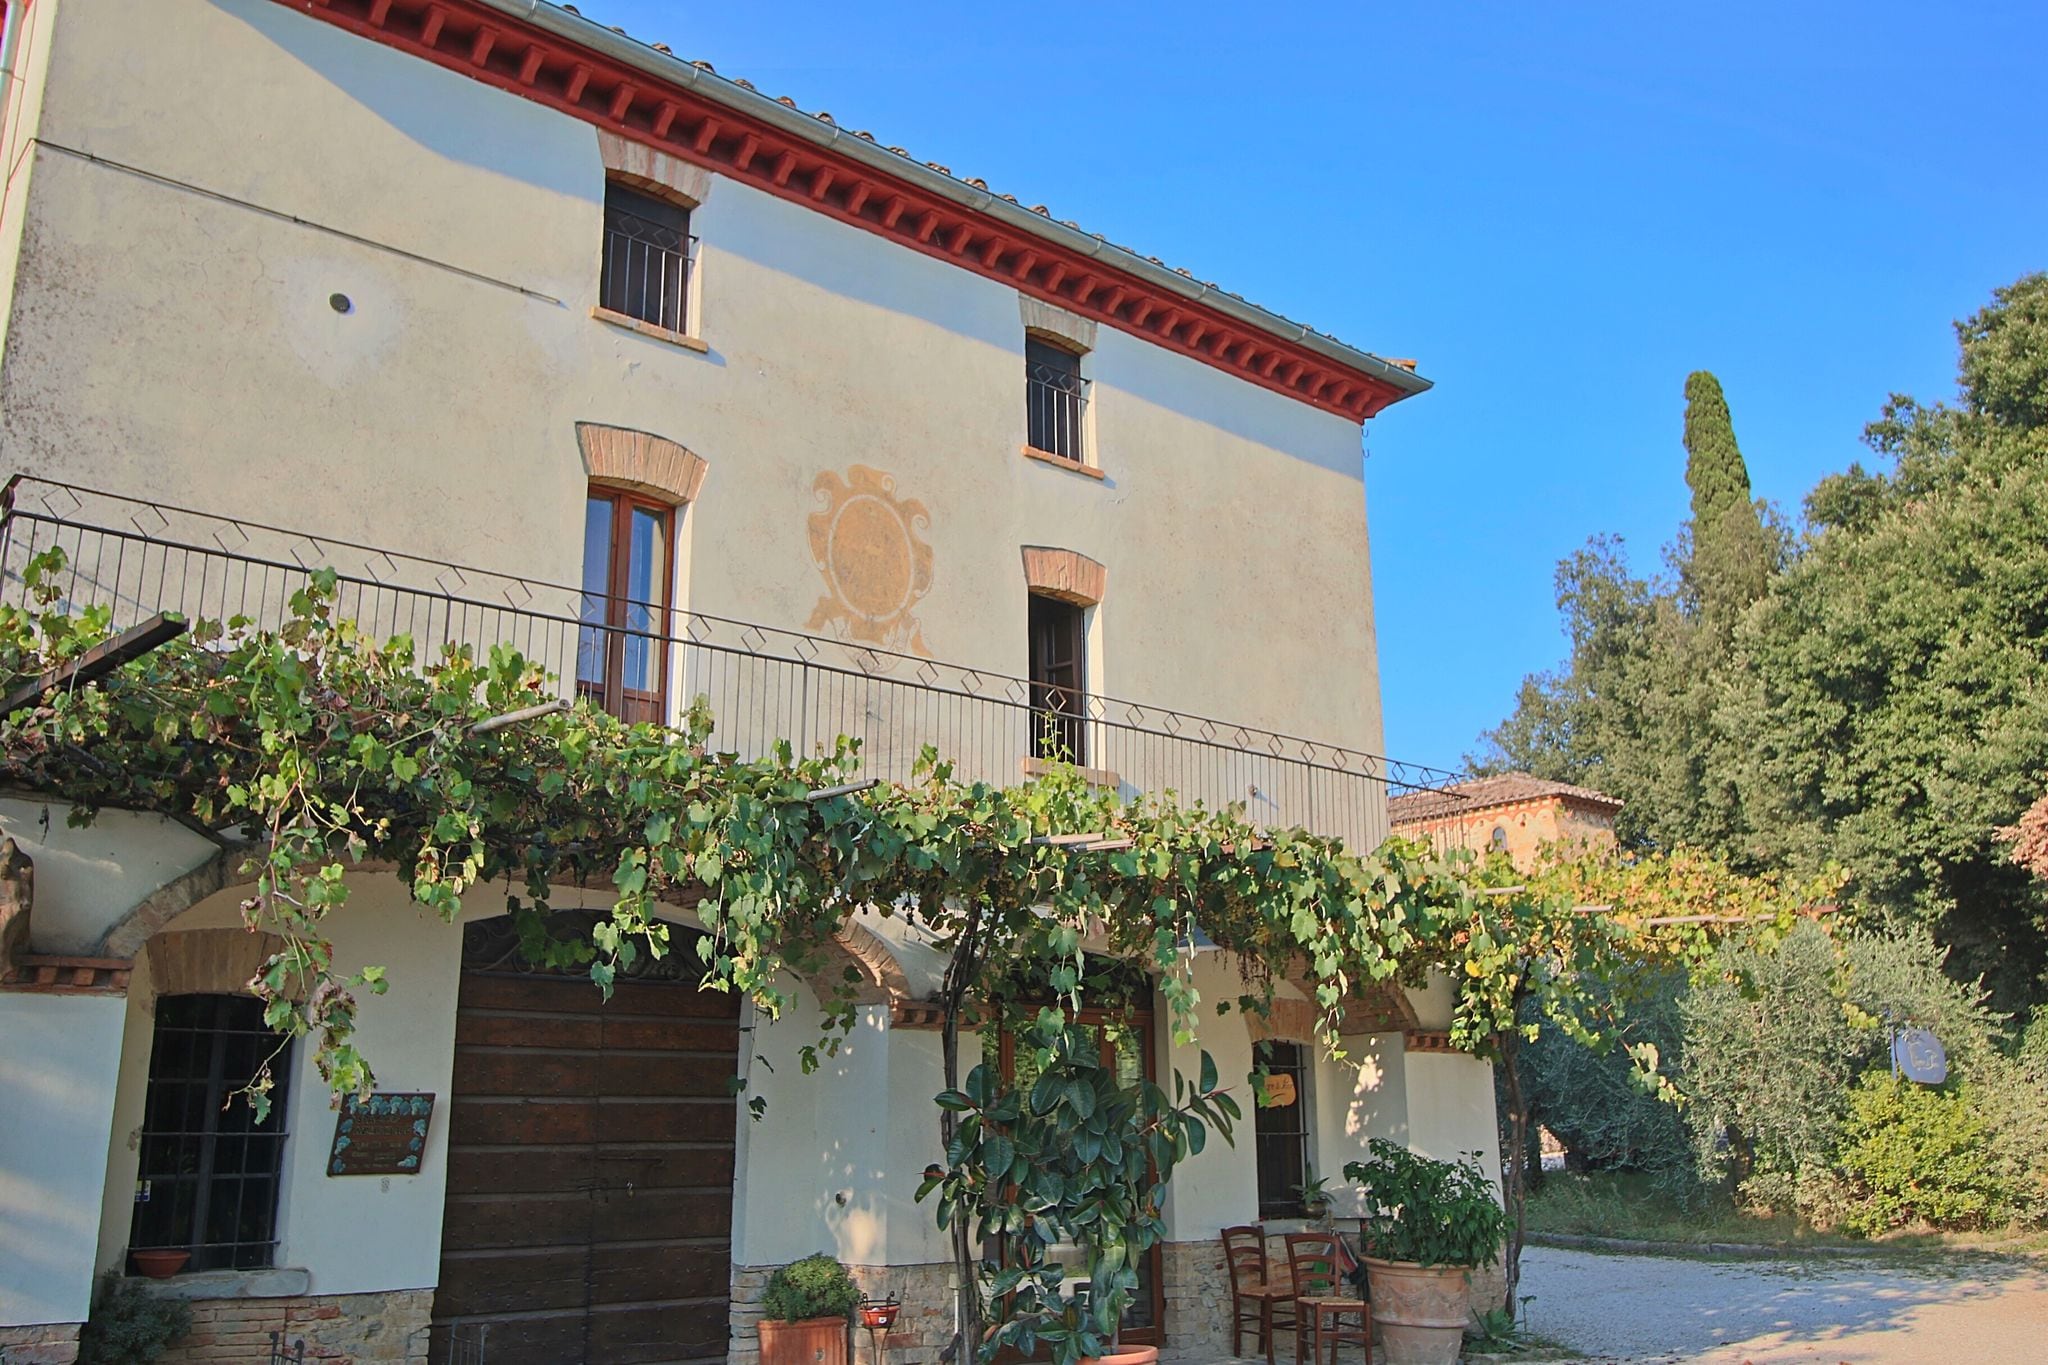 Apartment in an authentic farmhouse, centrally located on a wine estate.